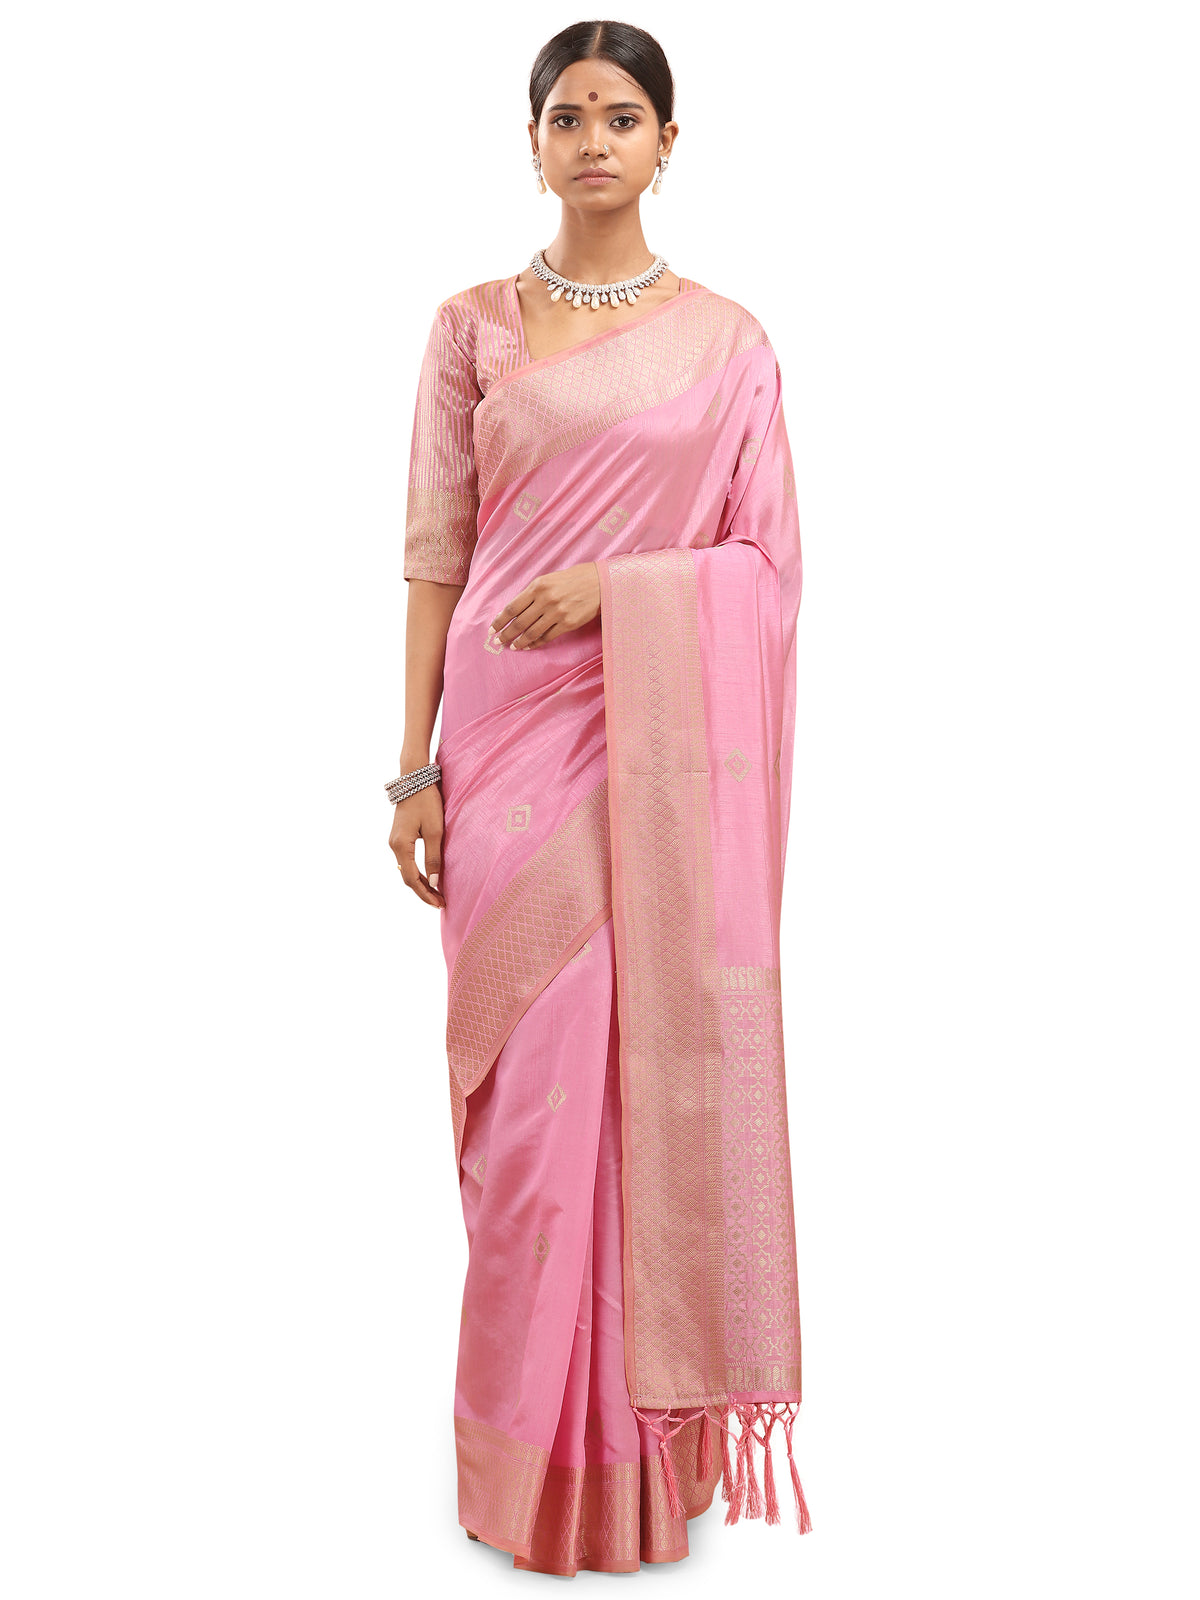 Insthah Women's Crepe 5.5 Meters Saree With 0.85 Meter Unstitched